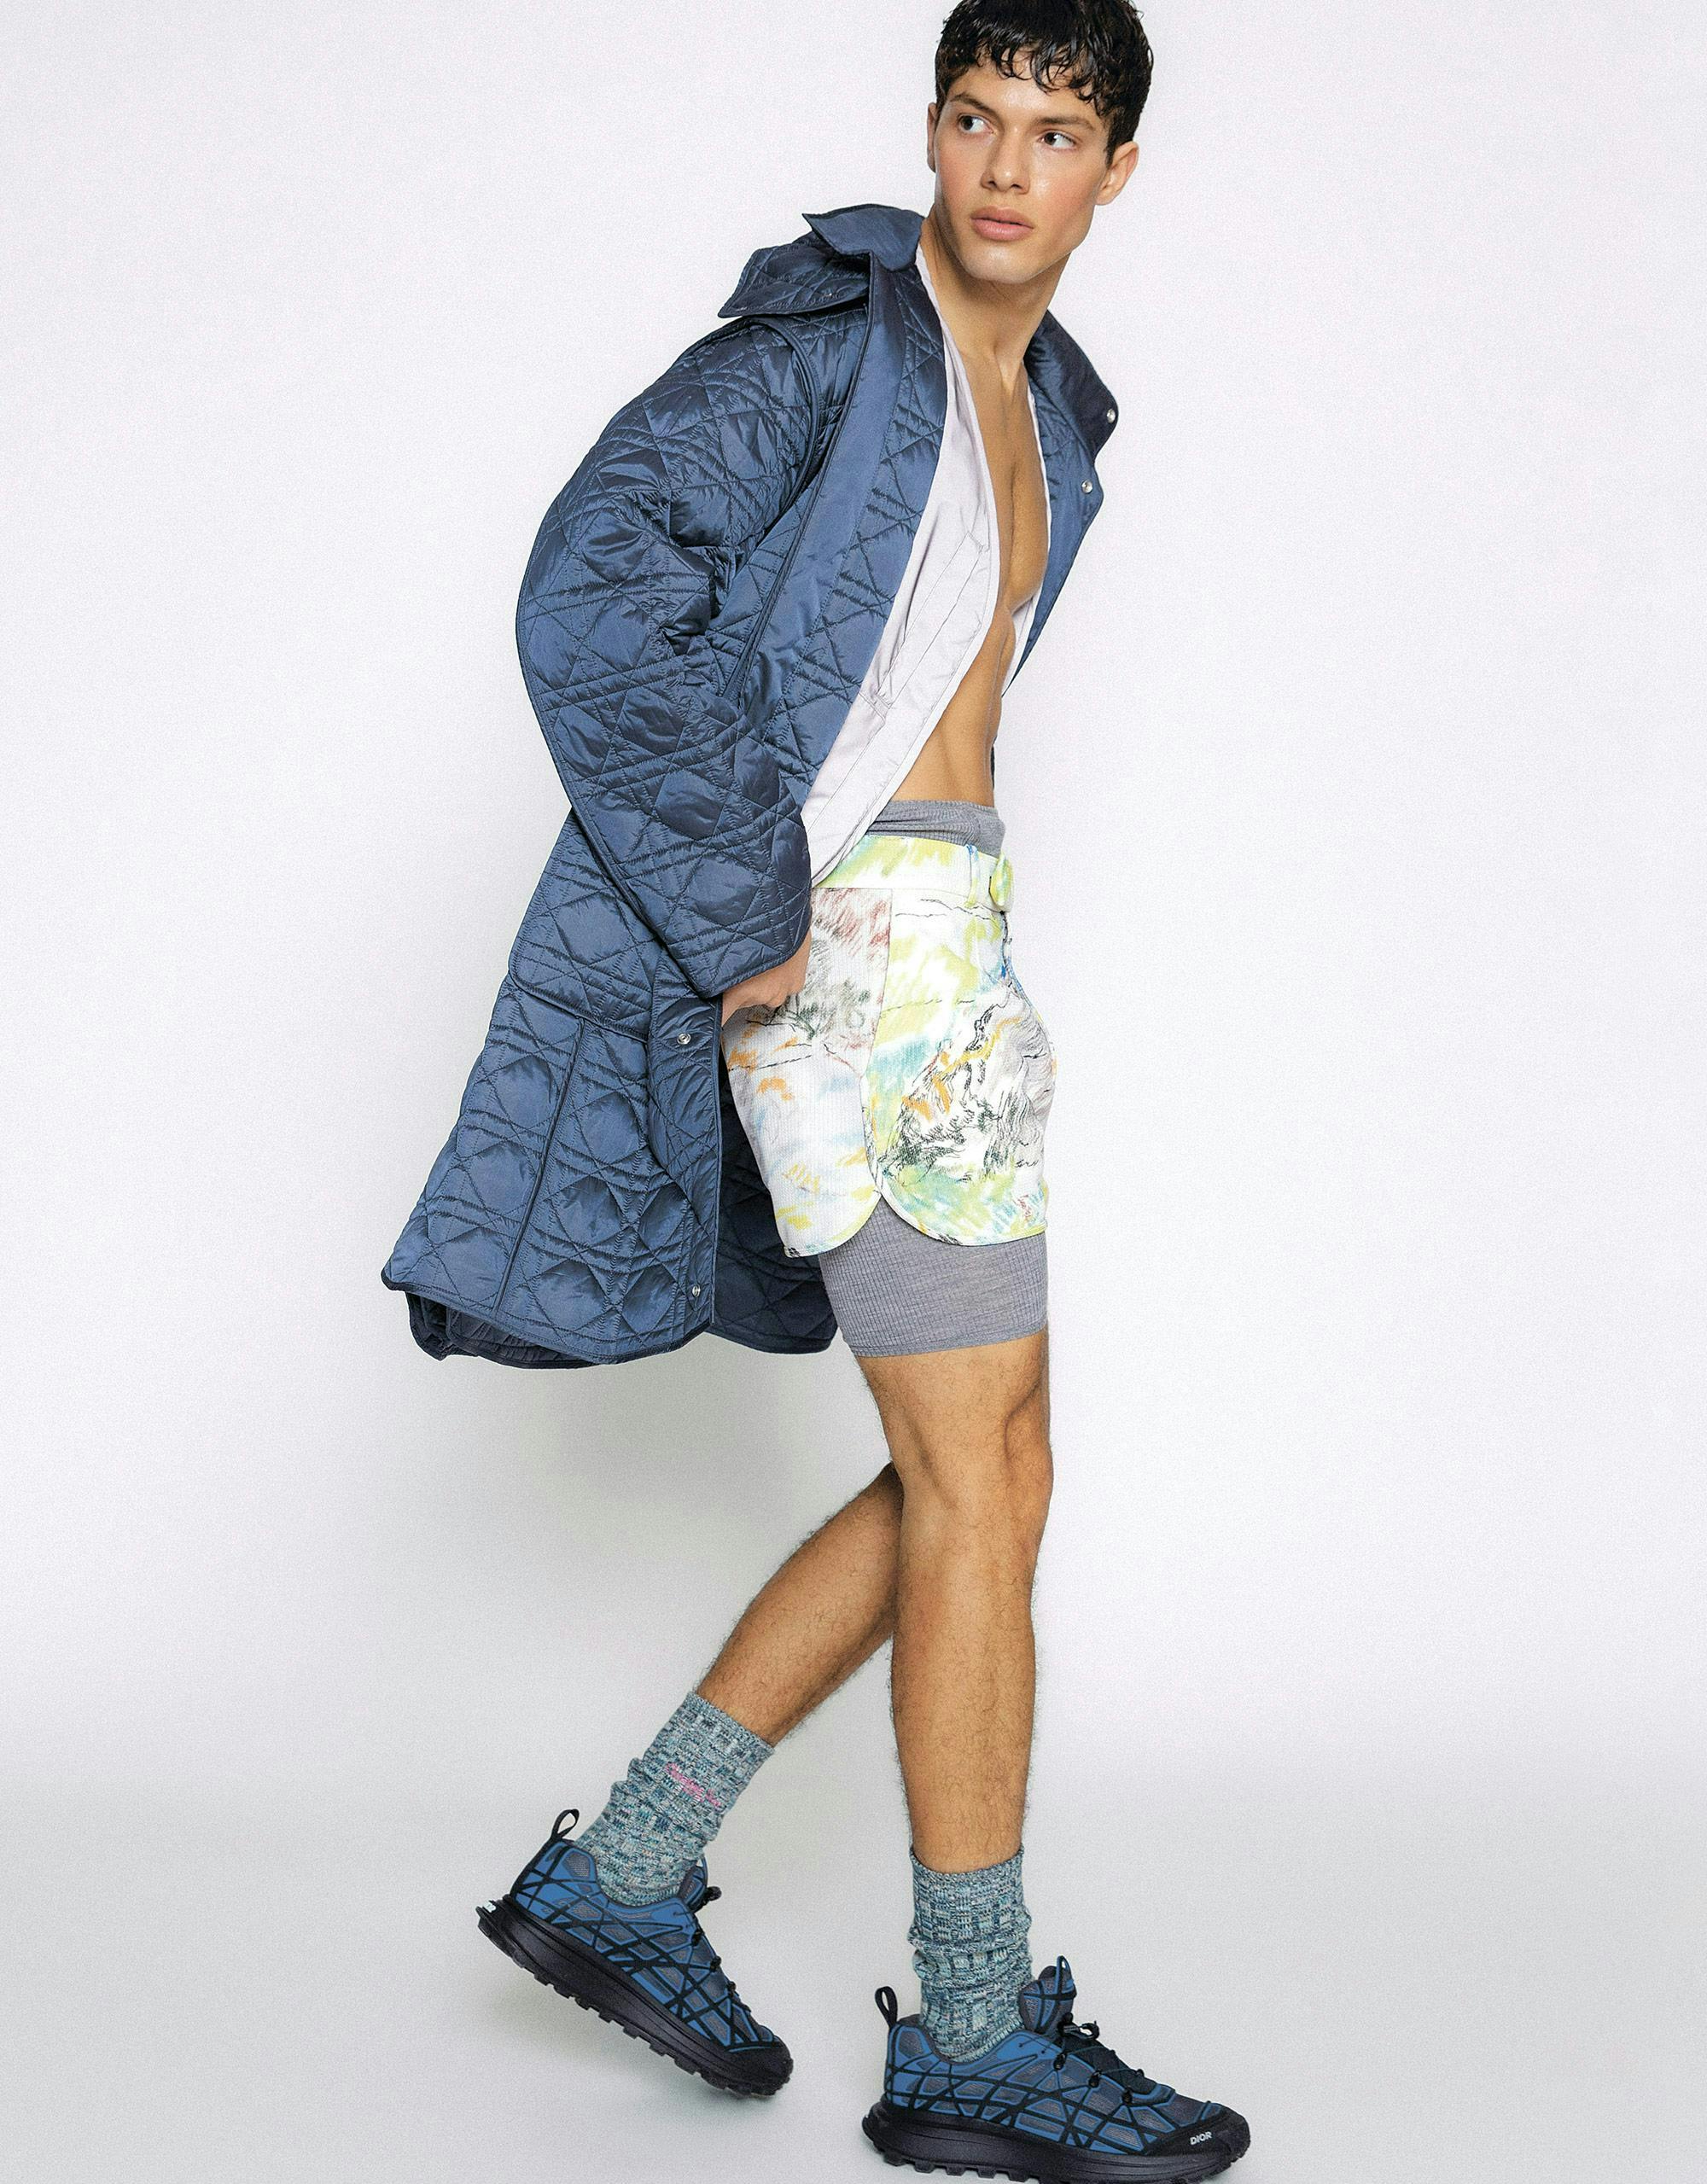 Man wearing blue quilted coat, unbuttoned shirt, shorts, and blue athletic shoes.